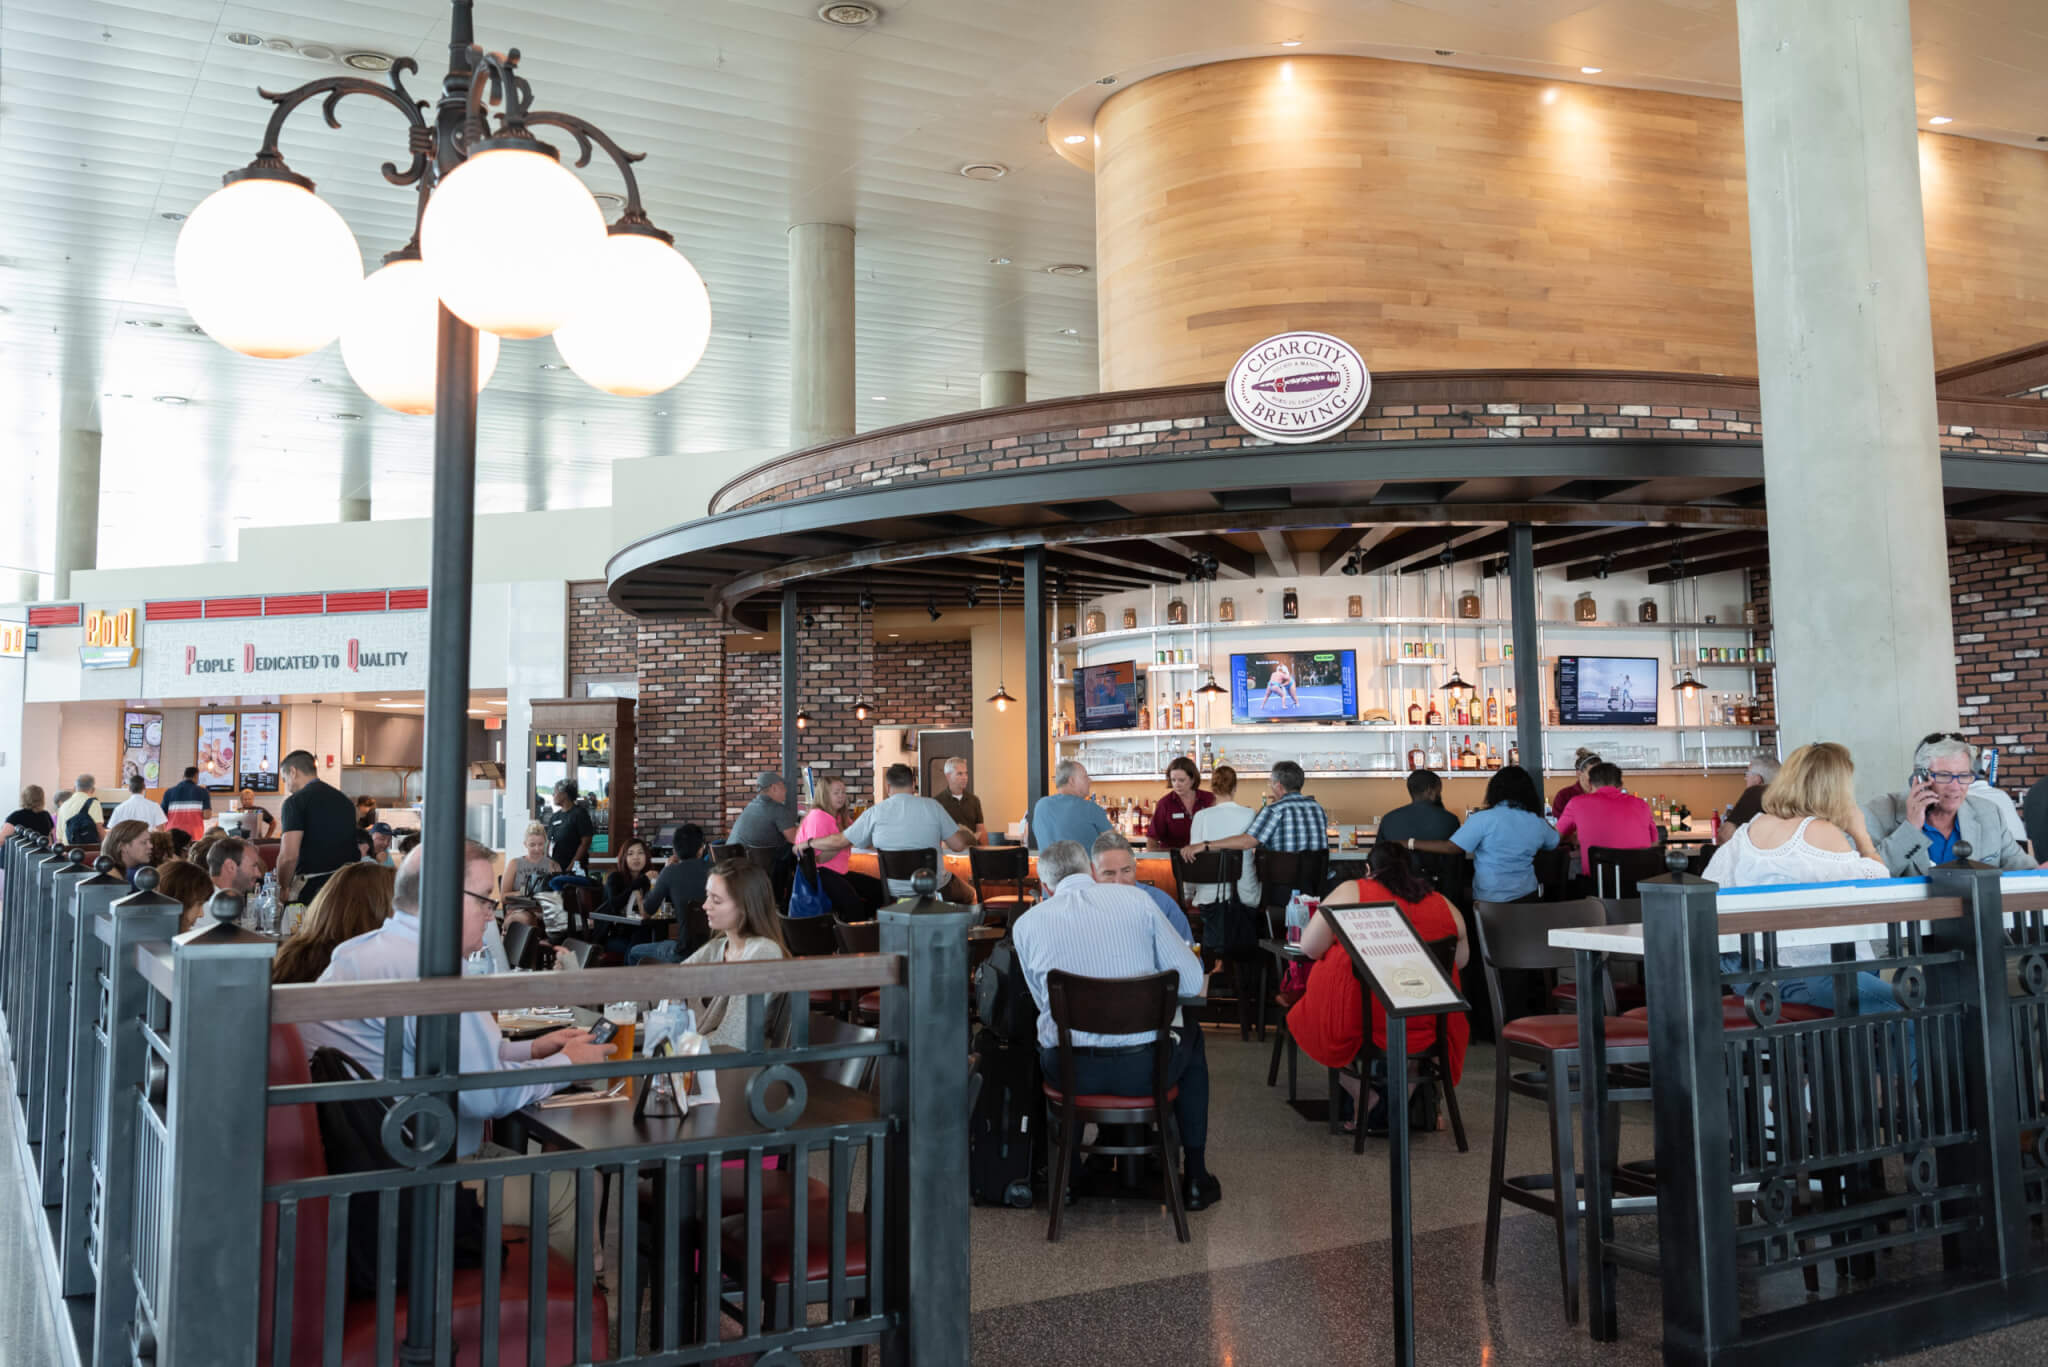 The Cigar City Brewing taproom inside Airside F at Tampa International Airport features the only actively brewing airport brewpub in North America.